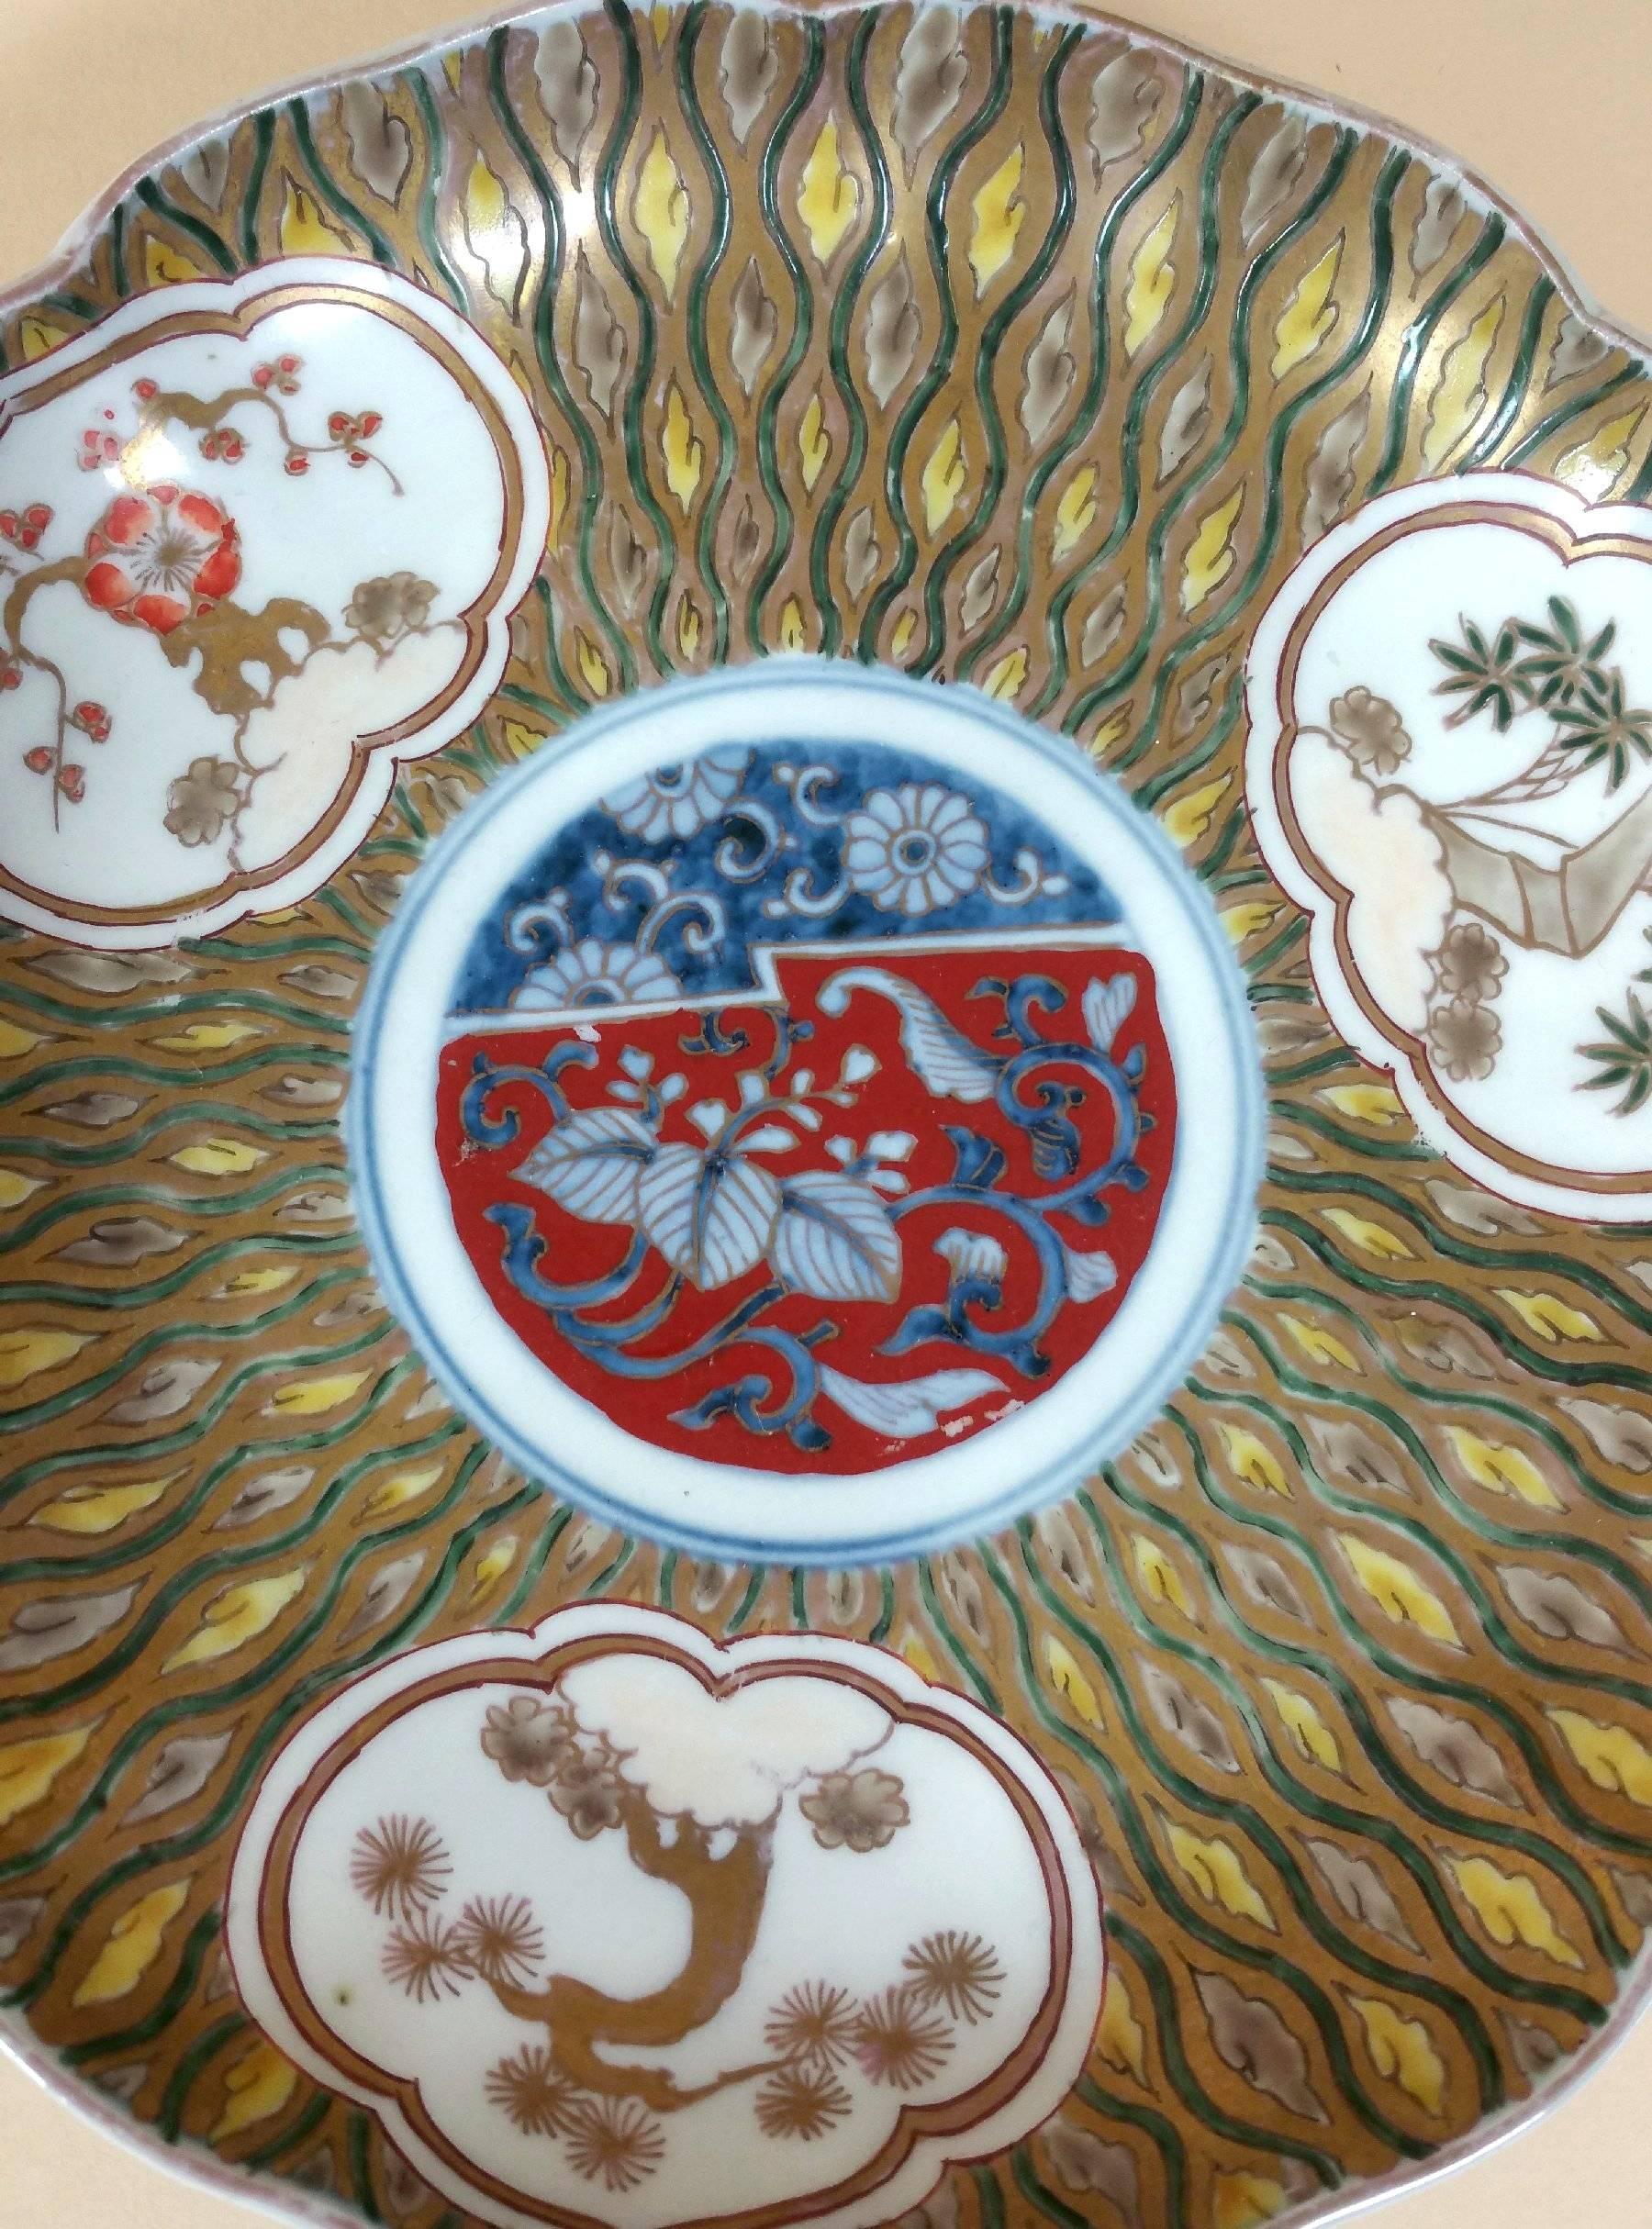 A fine Japanese Korancha lobed pottery dish painted in enamels depicting flowers, bamboo and a profuse design of gilt leaves and patterns. The dish has a Korancha blossom mark on the underside bottom of the dish with floras and scroll work along the